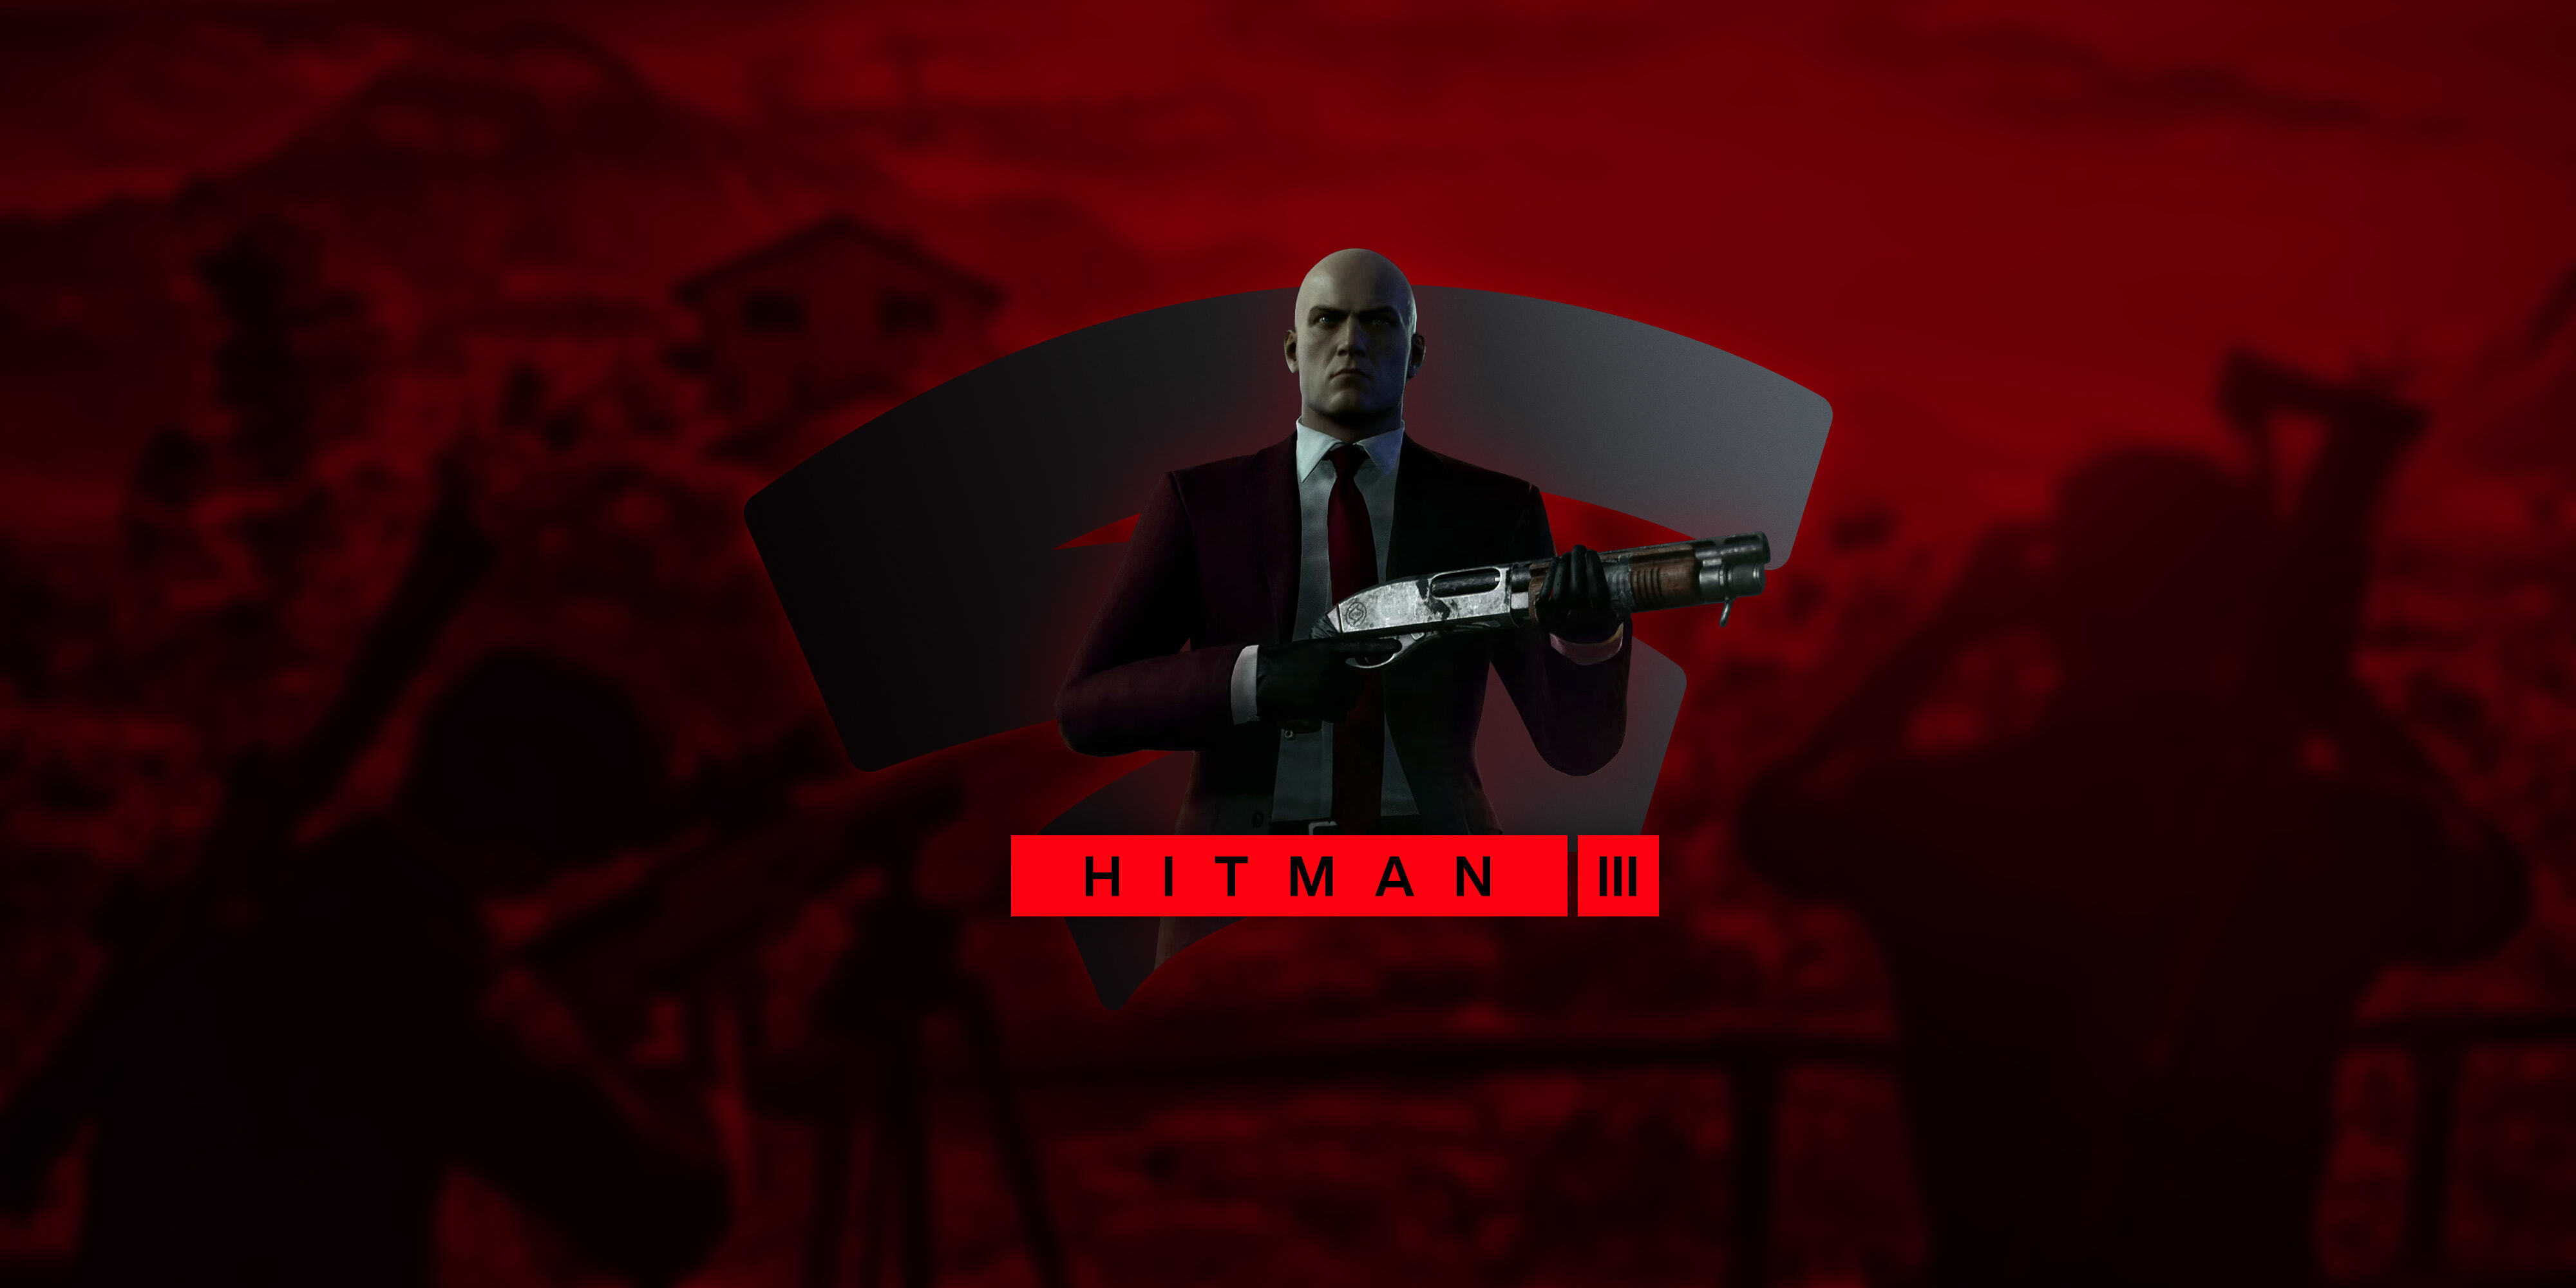 The free Hitman 3 starter pack lets you play the Dubai location